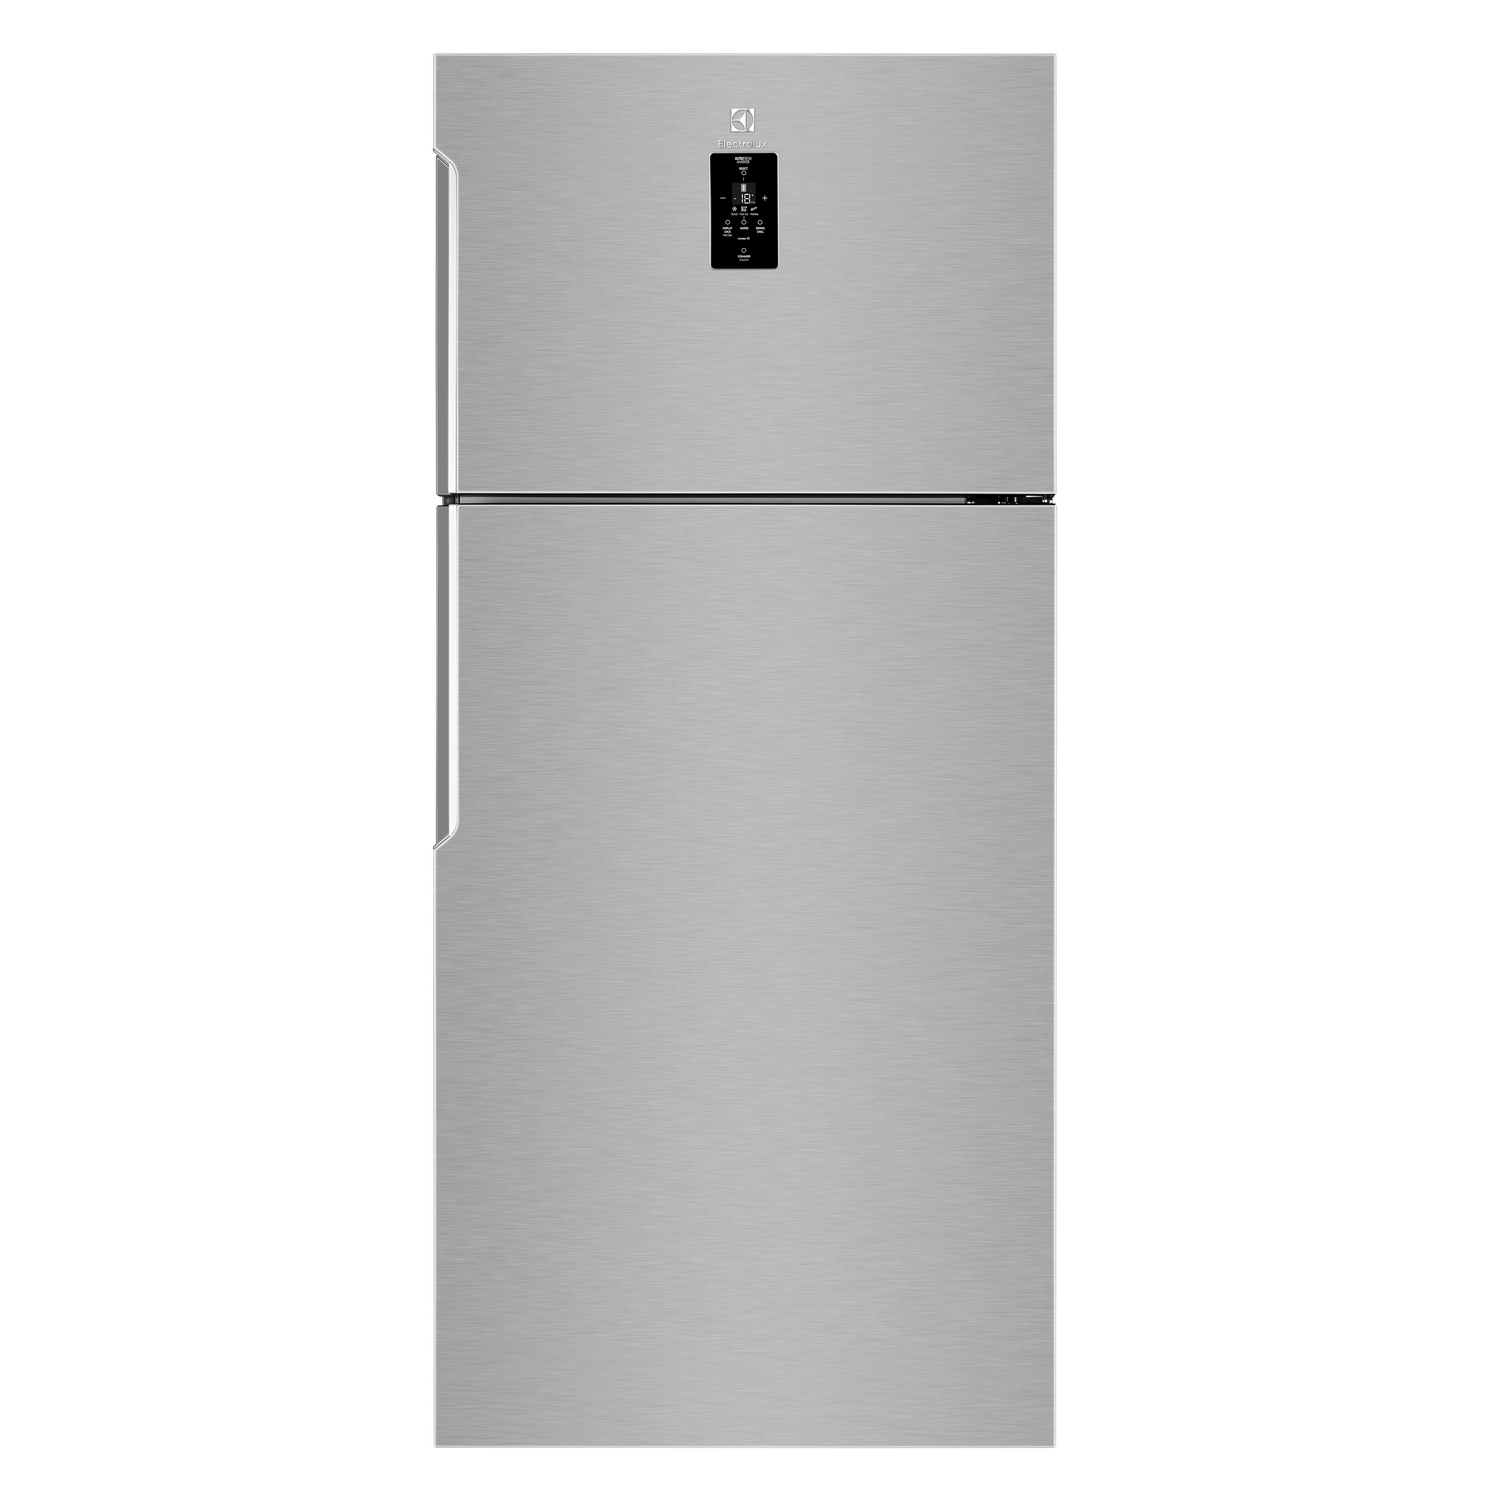 Electrolux Double Doors Refrigerator (18.9 Cubic) ETE5720B-A RTH